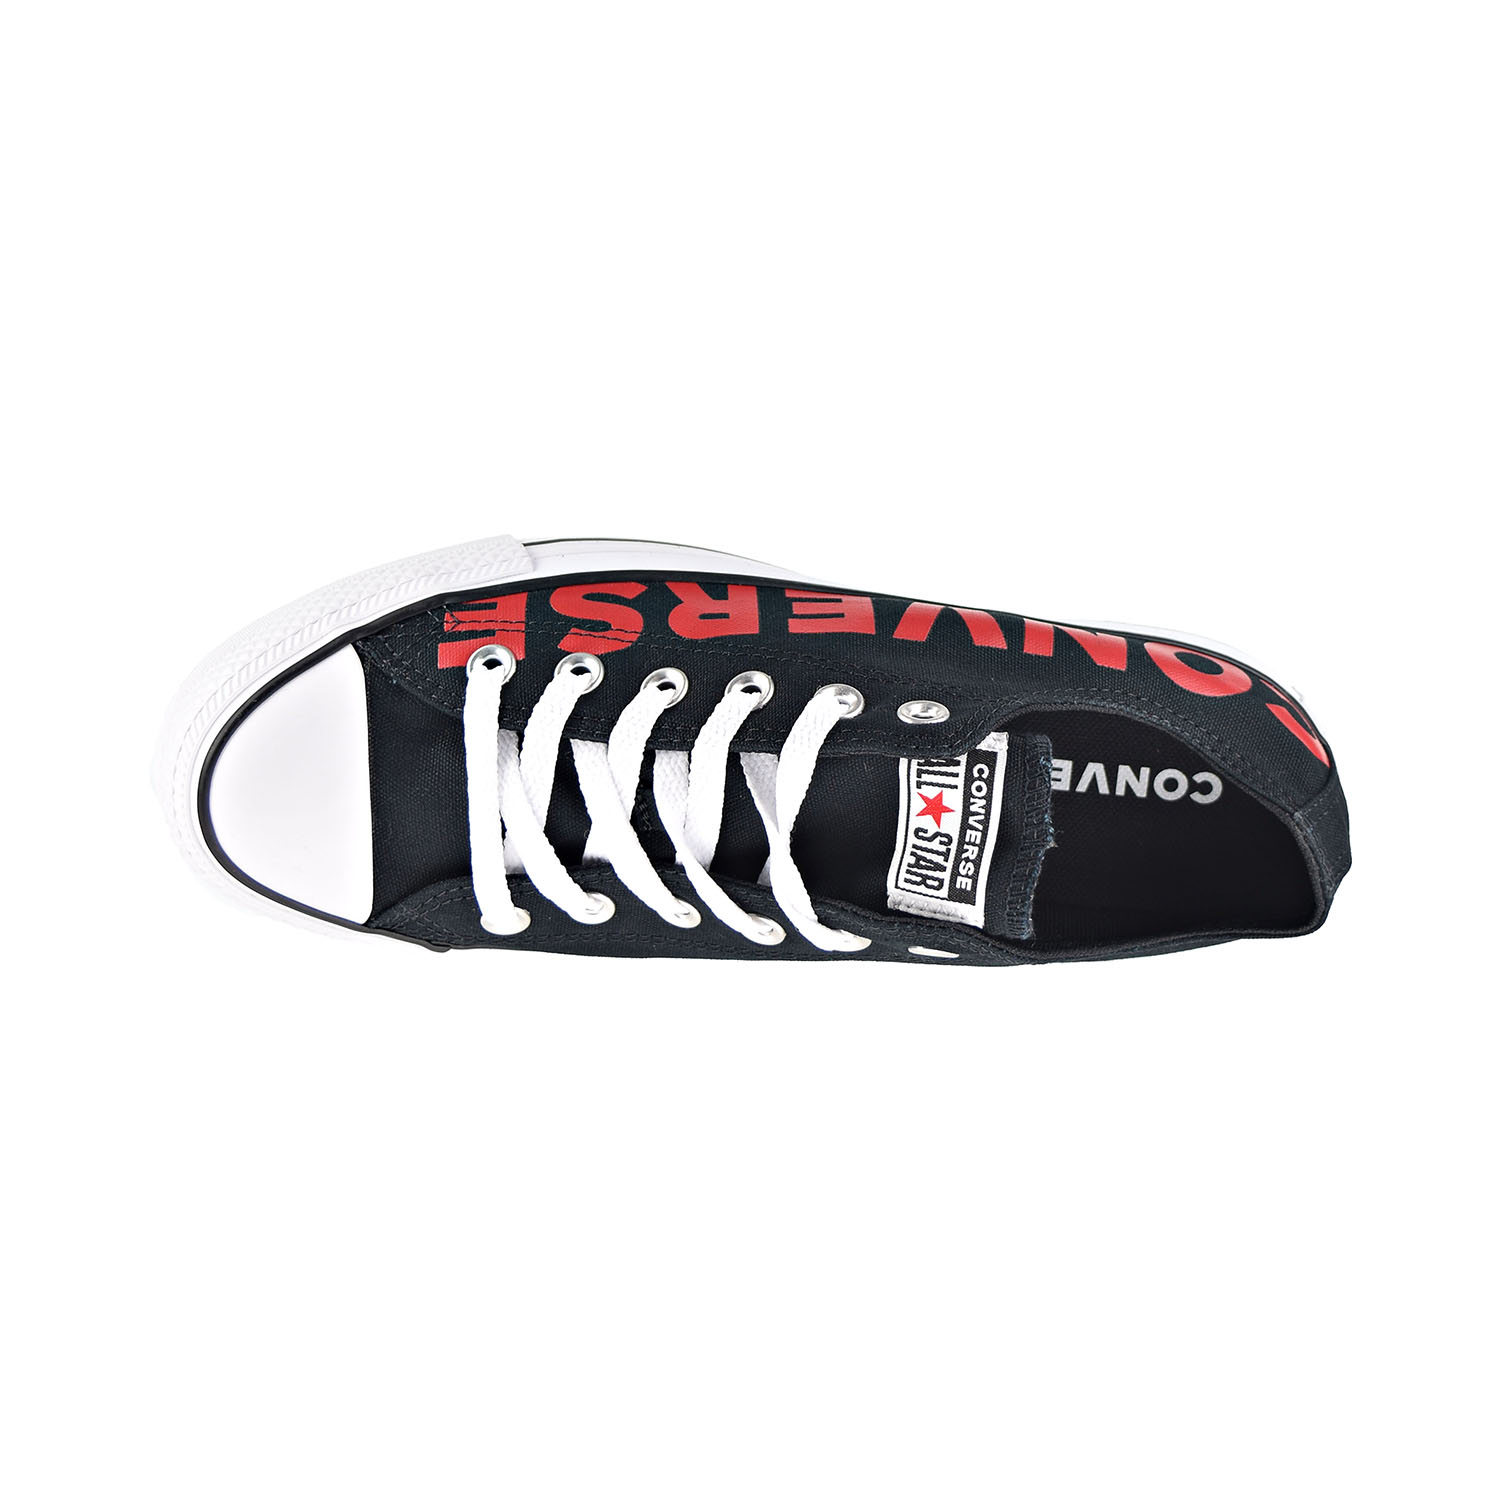 Converse Chuck Taylor All Star Ox Wordmark Men's Shoes Black-Enamel Red-White 165430f - image 5 of 6